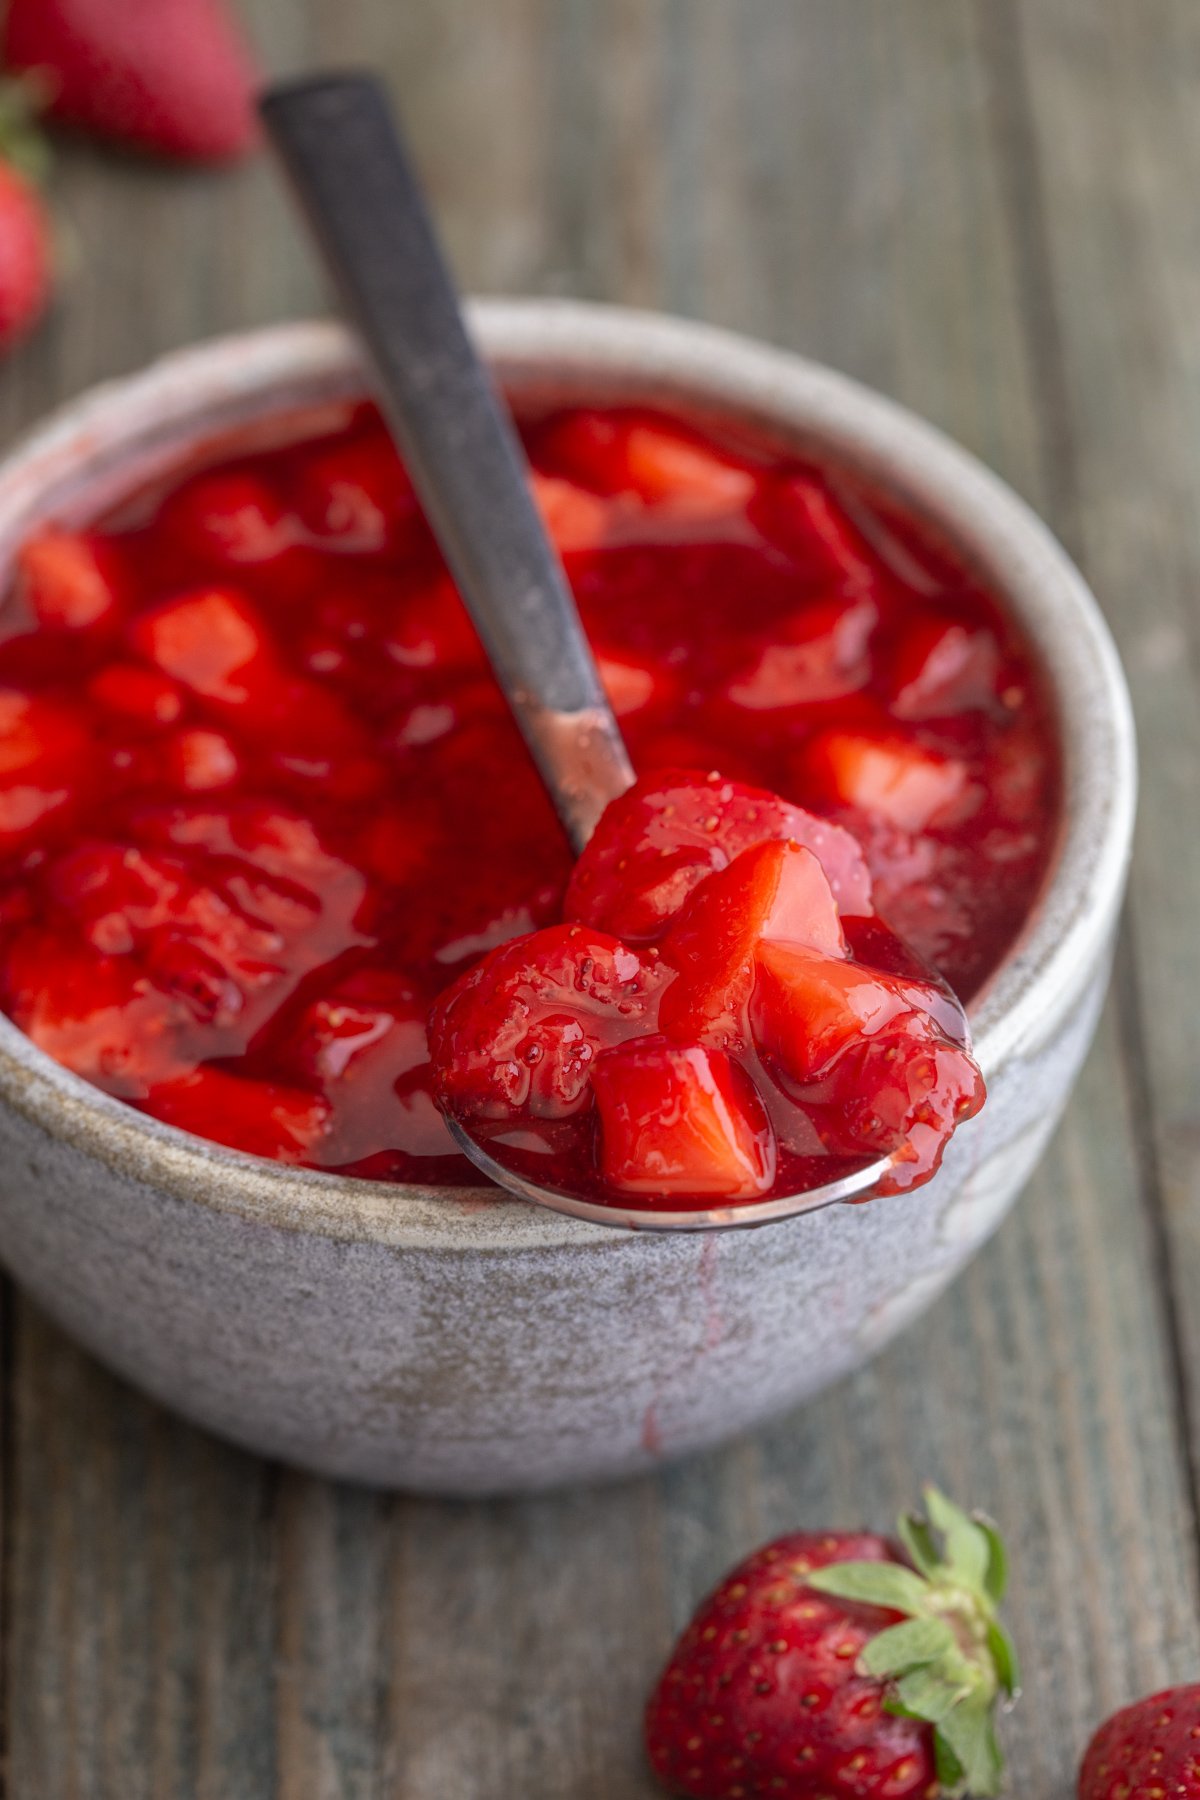 Strawberry sauce in a white bowl with some on a spoon.